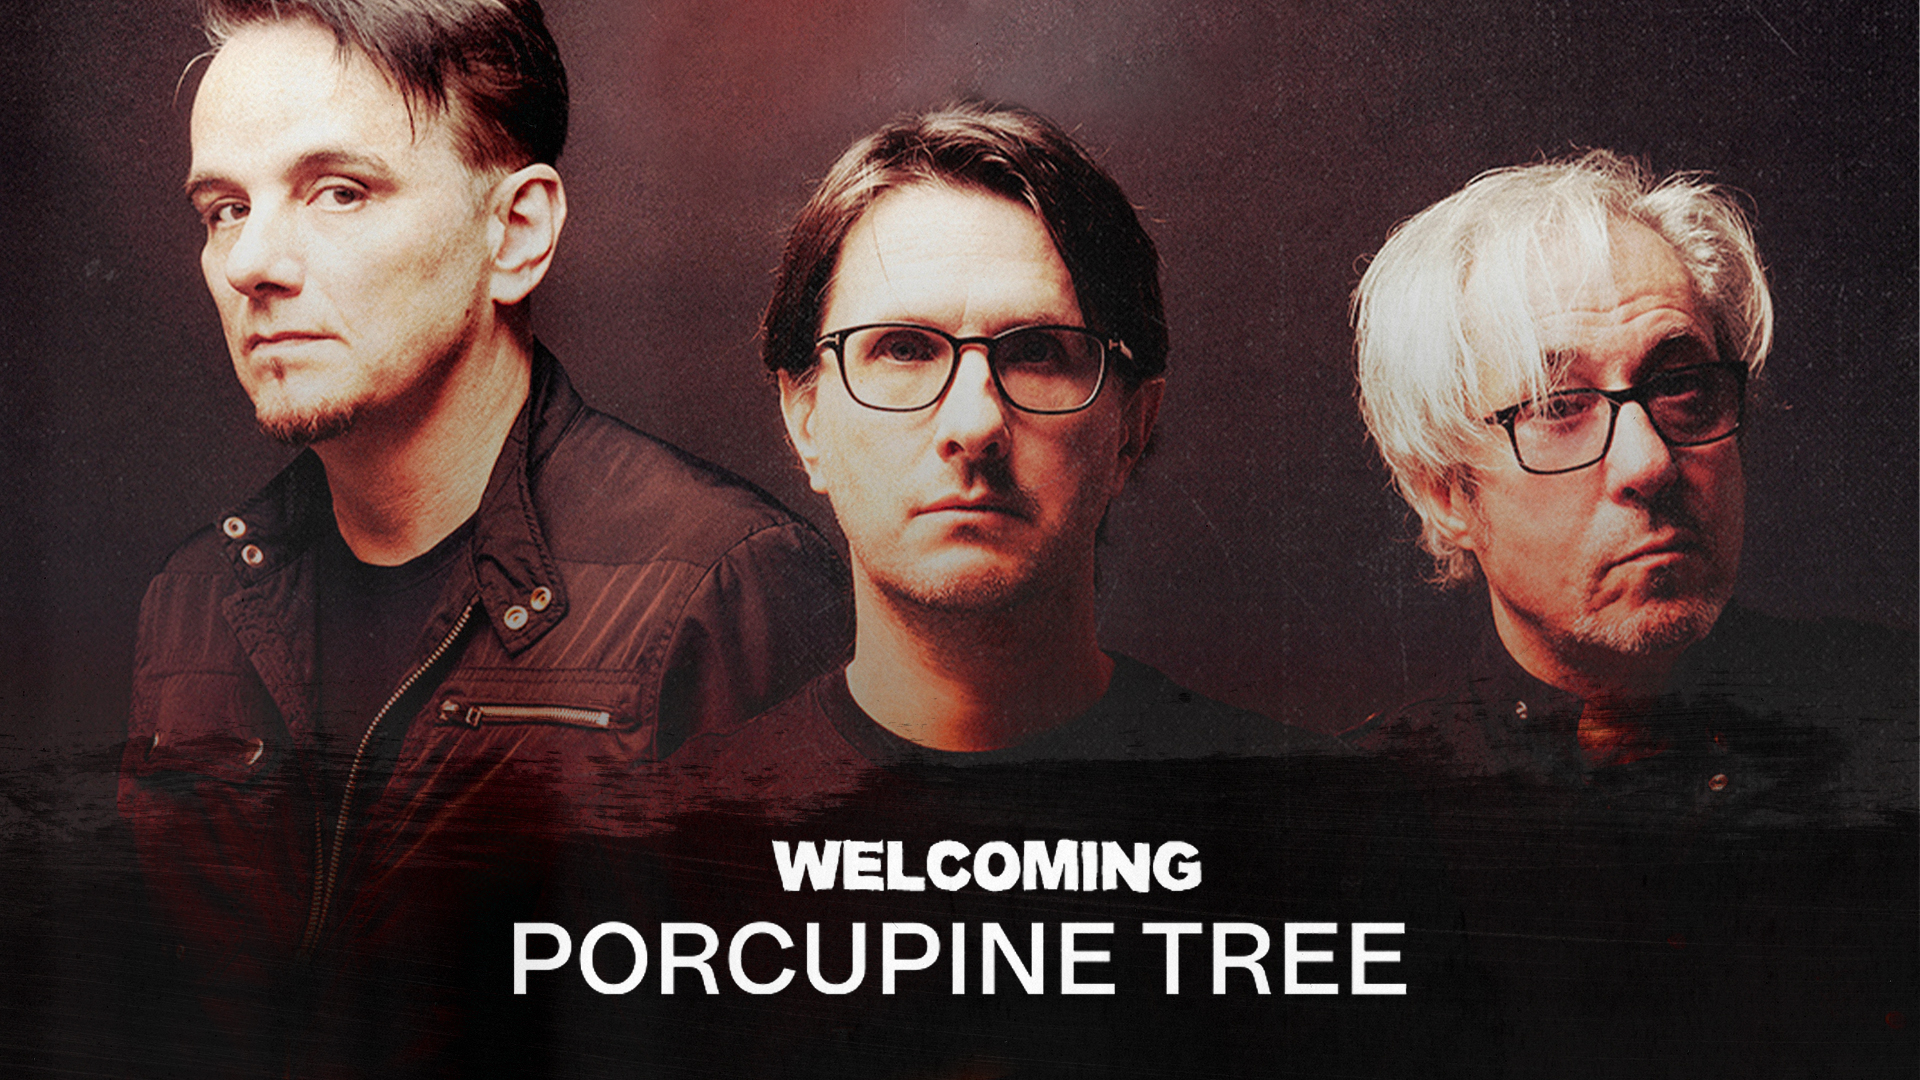 1920x1080 Music For Nations | Welcoming the One \u0026amp; Only Porcupine Tree to Music for Nations